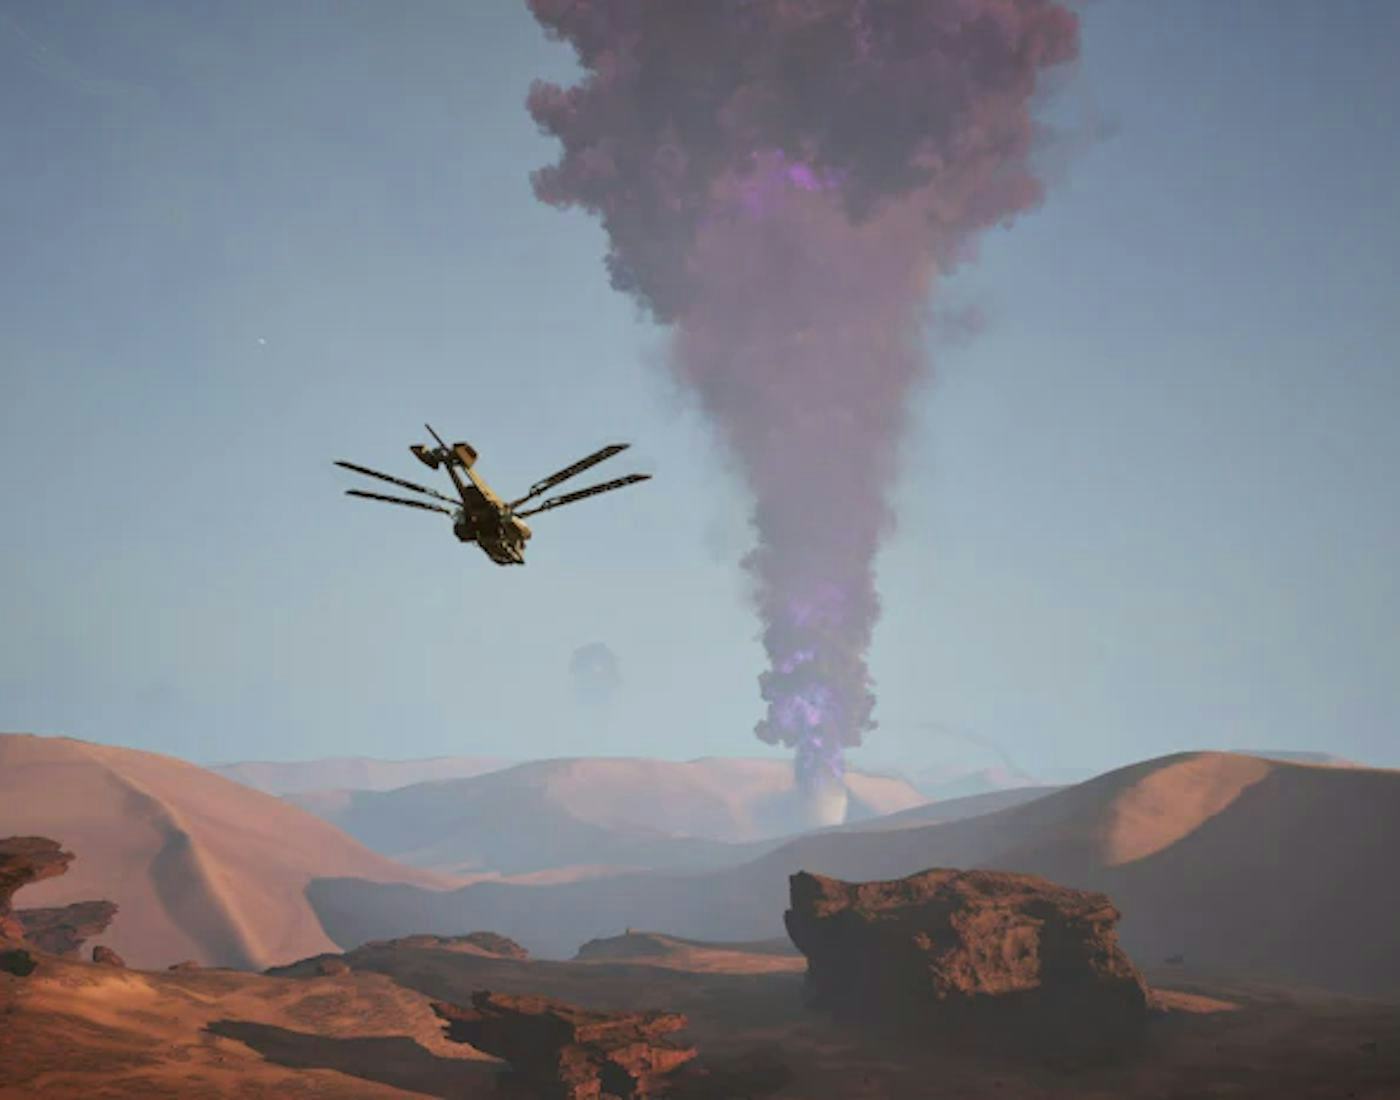 A computer-generated image of a desert landscape with a large purple smoke plume and a futuristic aircraft flying nearby.